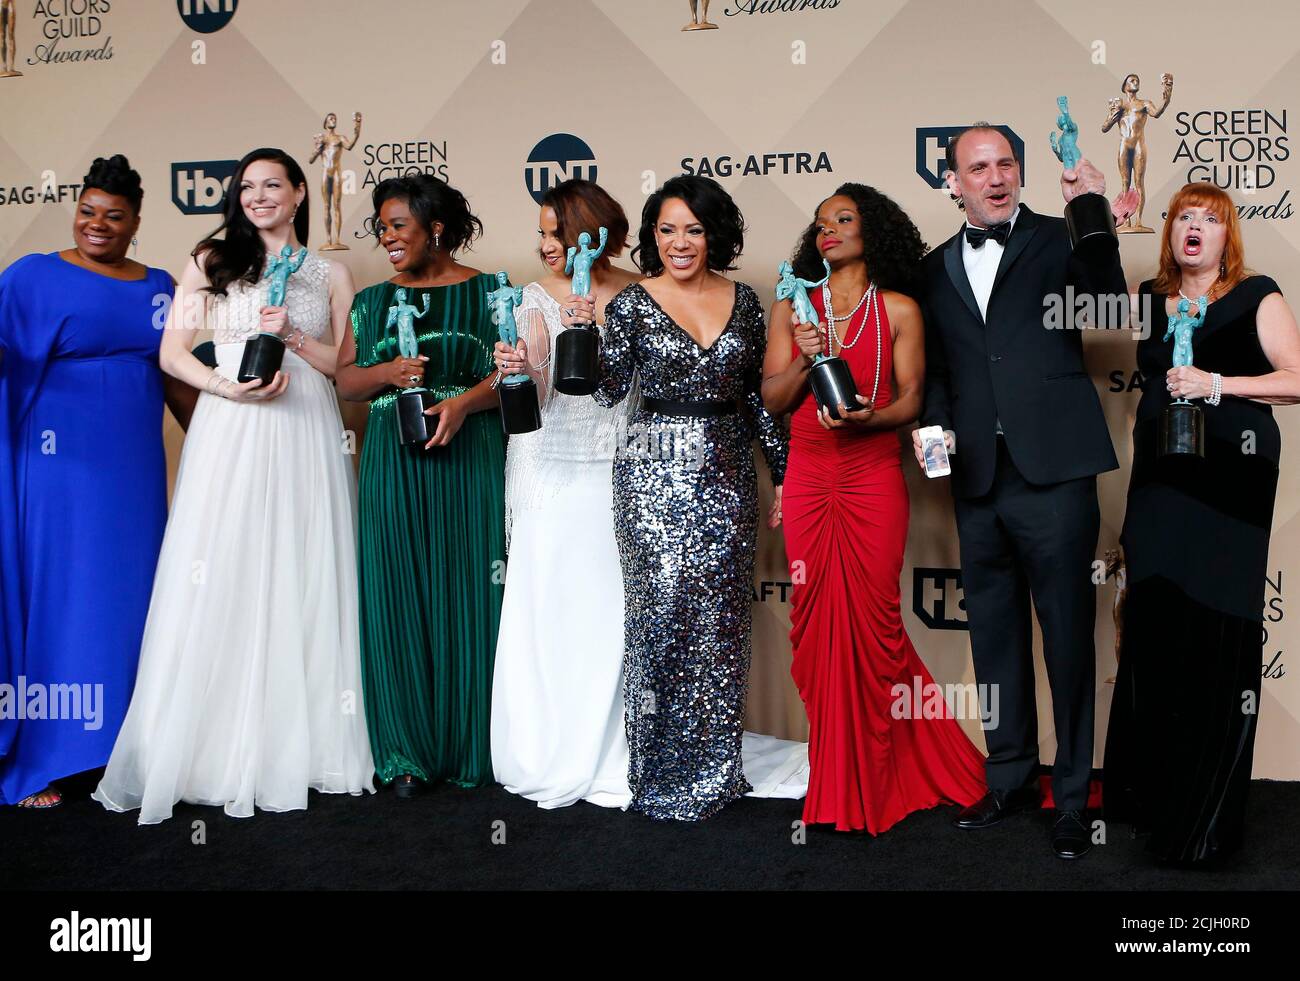 Cast Members Of Orange Is The New Black Hold Their Awards For Outstanding Performance By An Ensemble In A Comedy Series During The 22nd Screen Actors Guild Awards In Los Angeles California